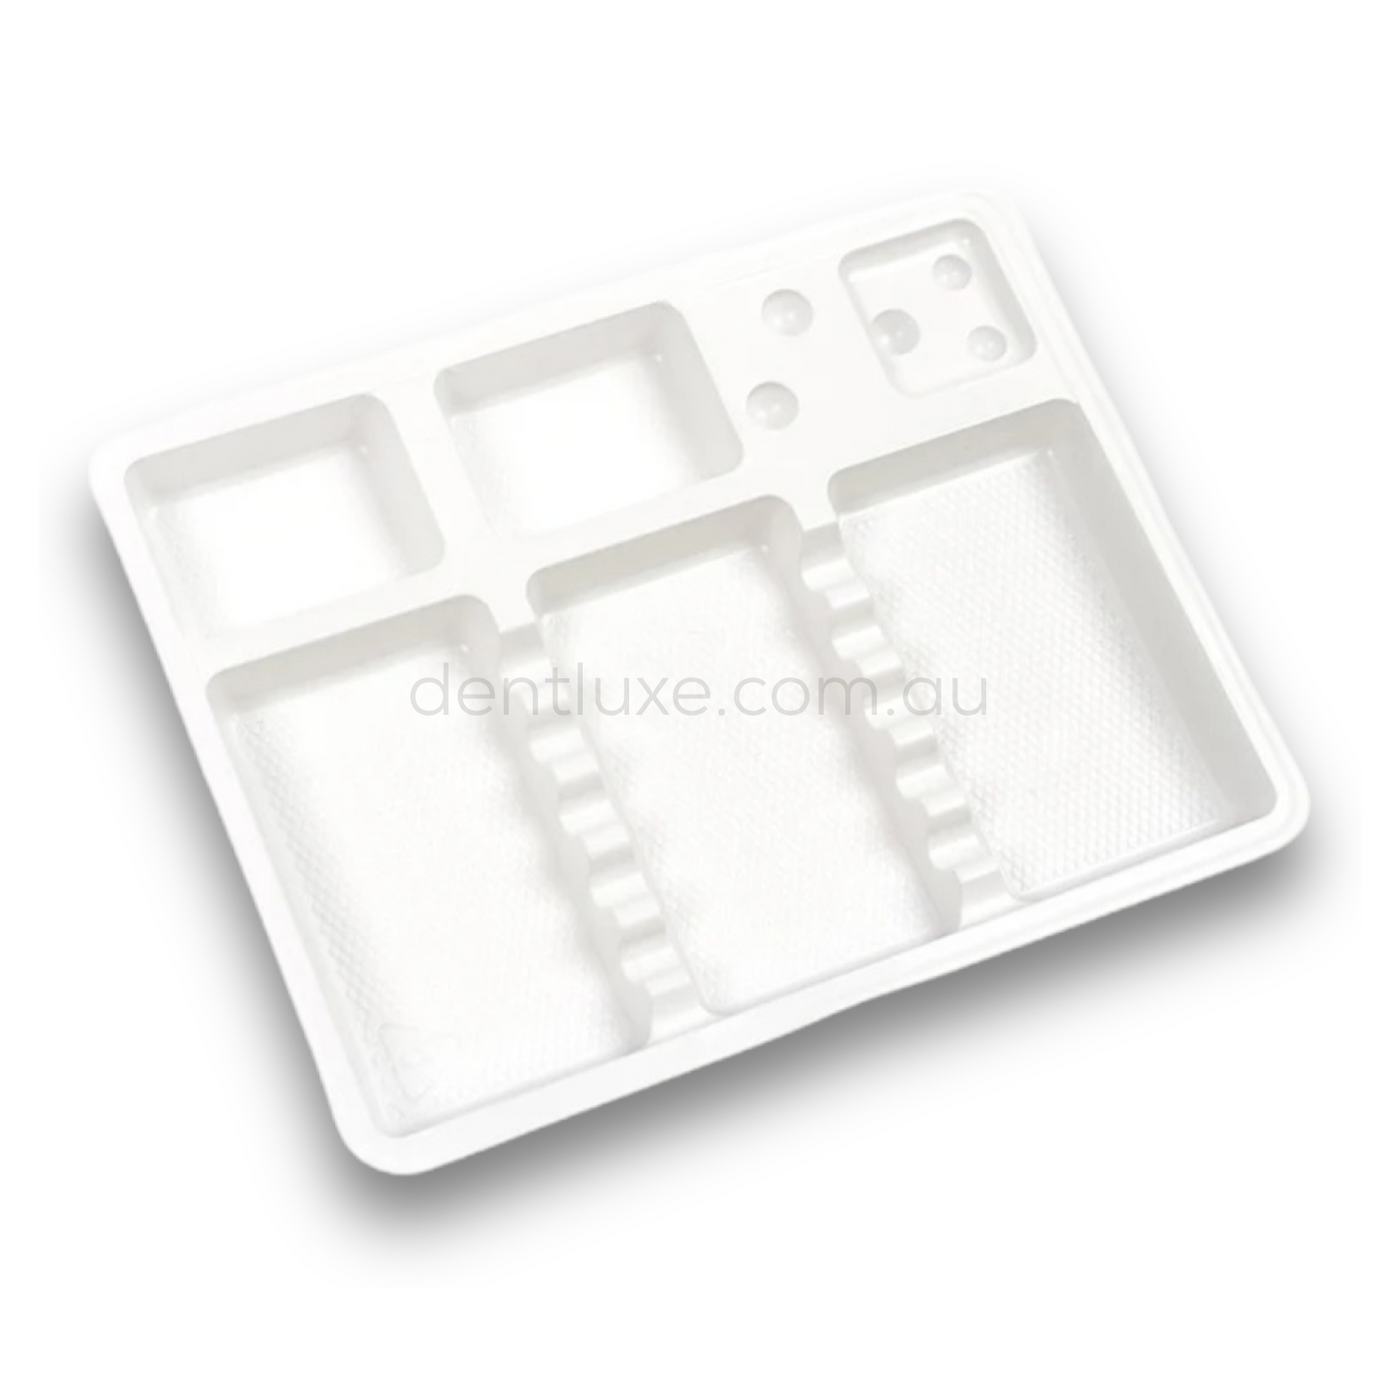 Disposable Instrument Dental Trays